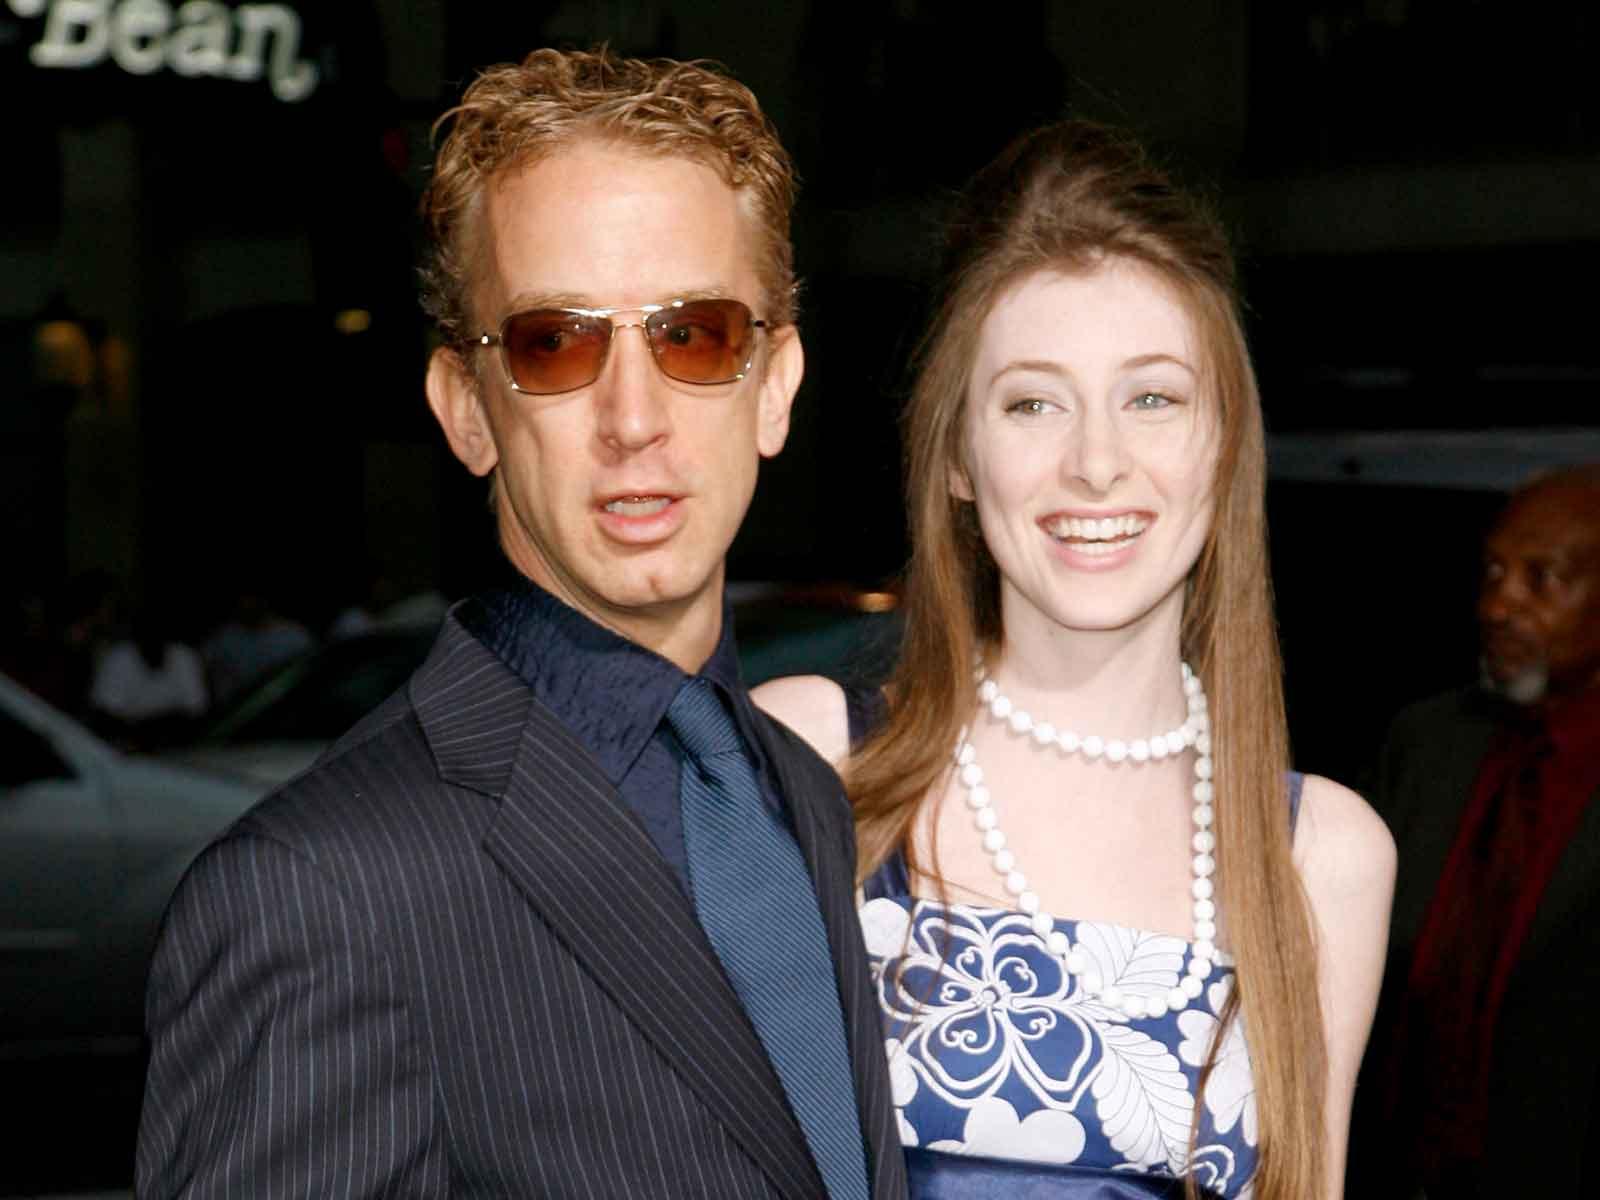 Andy Dick’s Wife Claims Drunken Arguments with Son Led to Her Seeking Protection